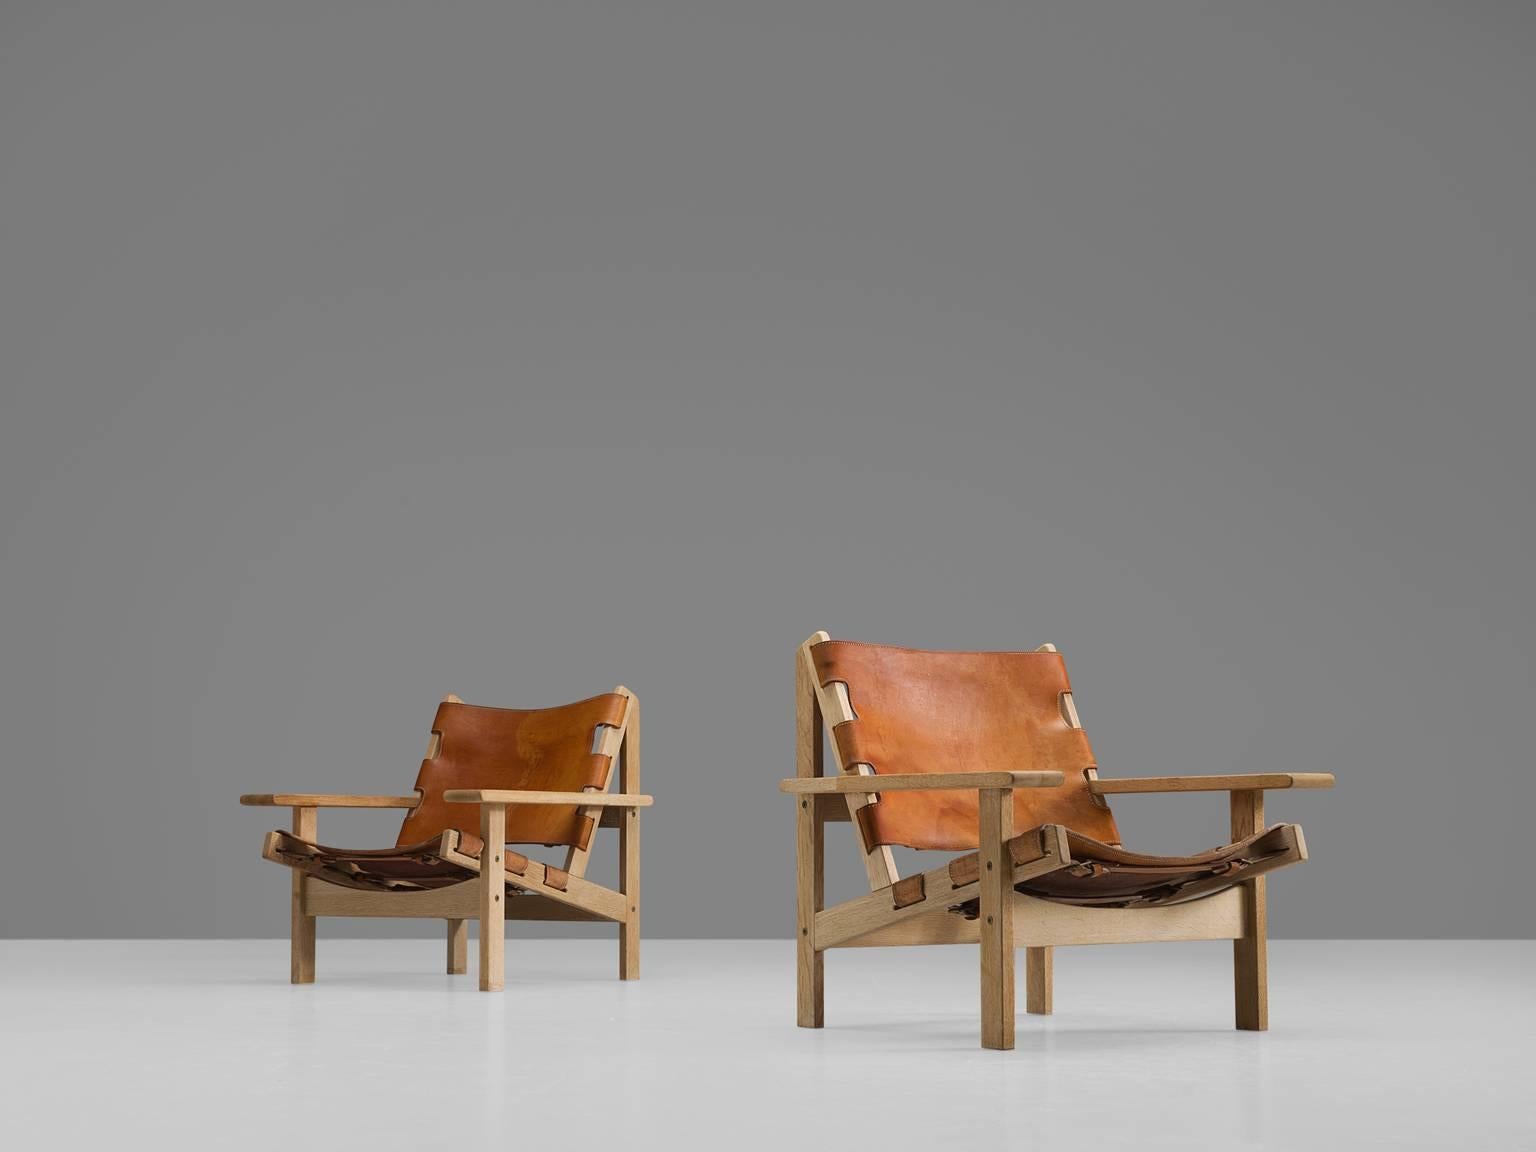 Erling Jessen, pair of lounge chairs model 168, solid oak, leather, Denmark, 1960s

This set shows exquisite Danish craftsmanship and aesthetics. The set features traits of hunting and a cabin lodge style. The slightly tilted back and result in a